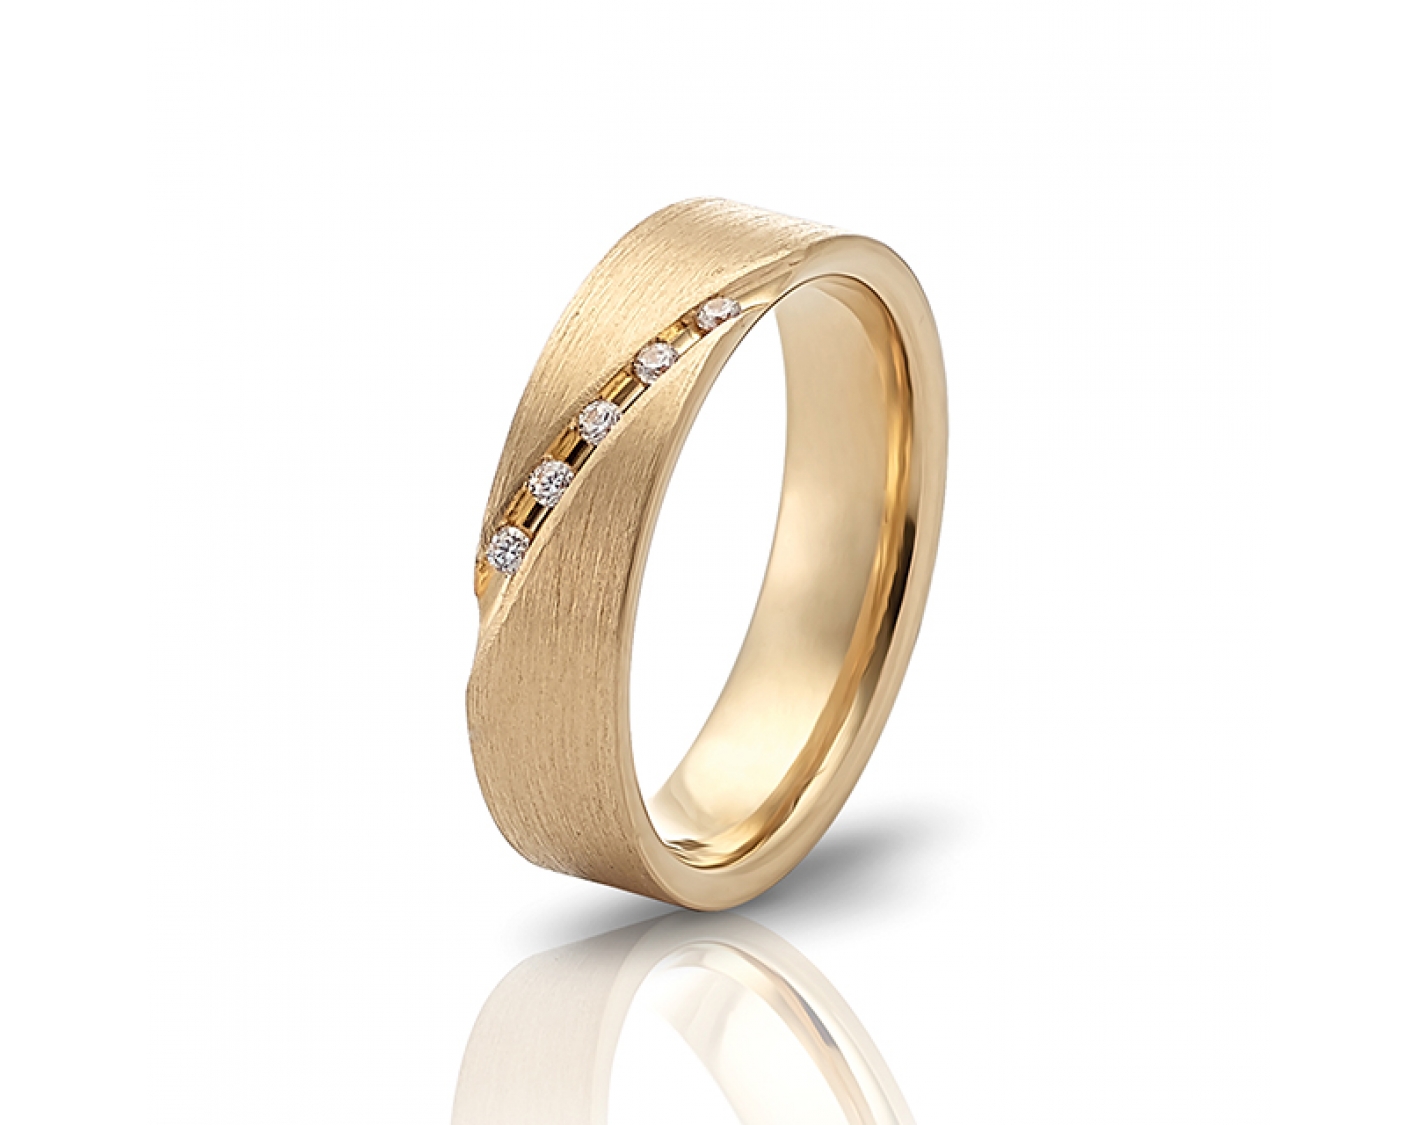 18k yellow gold 5mm matte wedding band with diagonal line and diamonds